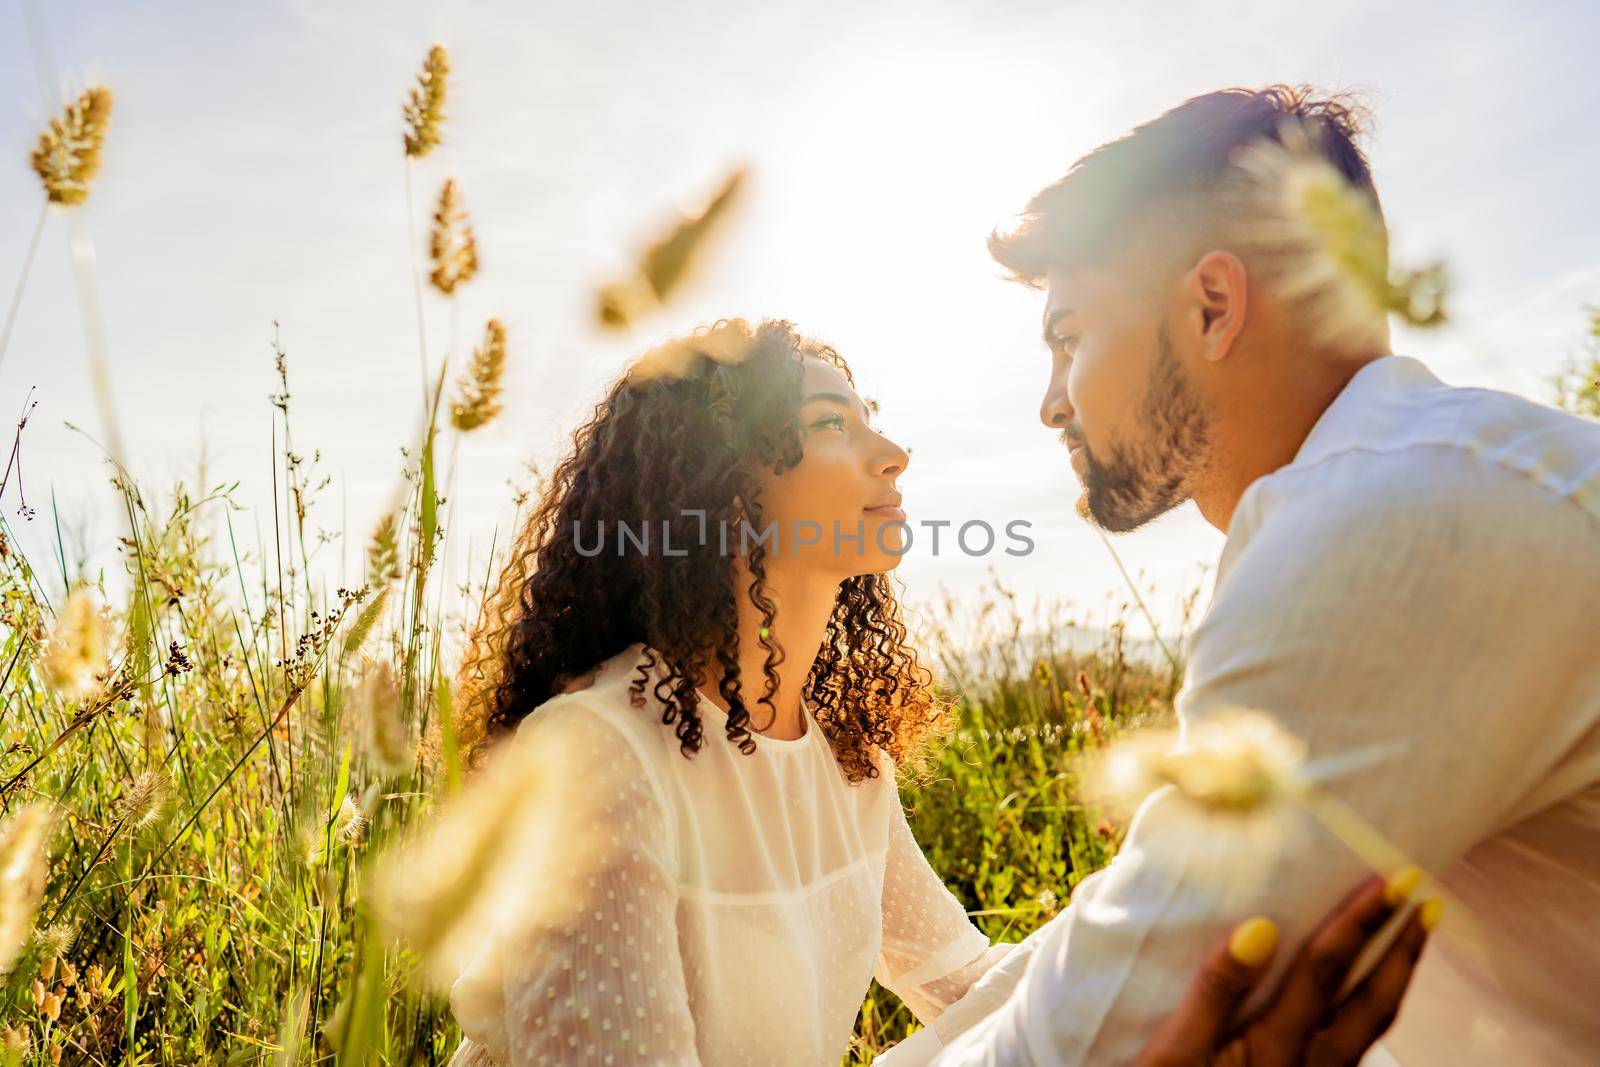 Romantic scene of multiracial passionate young couple in love looking in eyes each other among high grass vegetation at sunset or dawn with sun backlit effect Romance dream shot of lovers in nature by robbyfontanesi